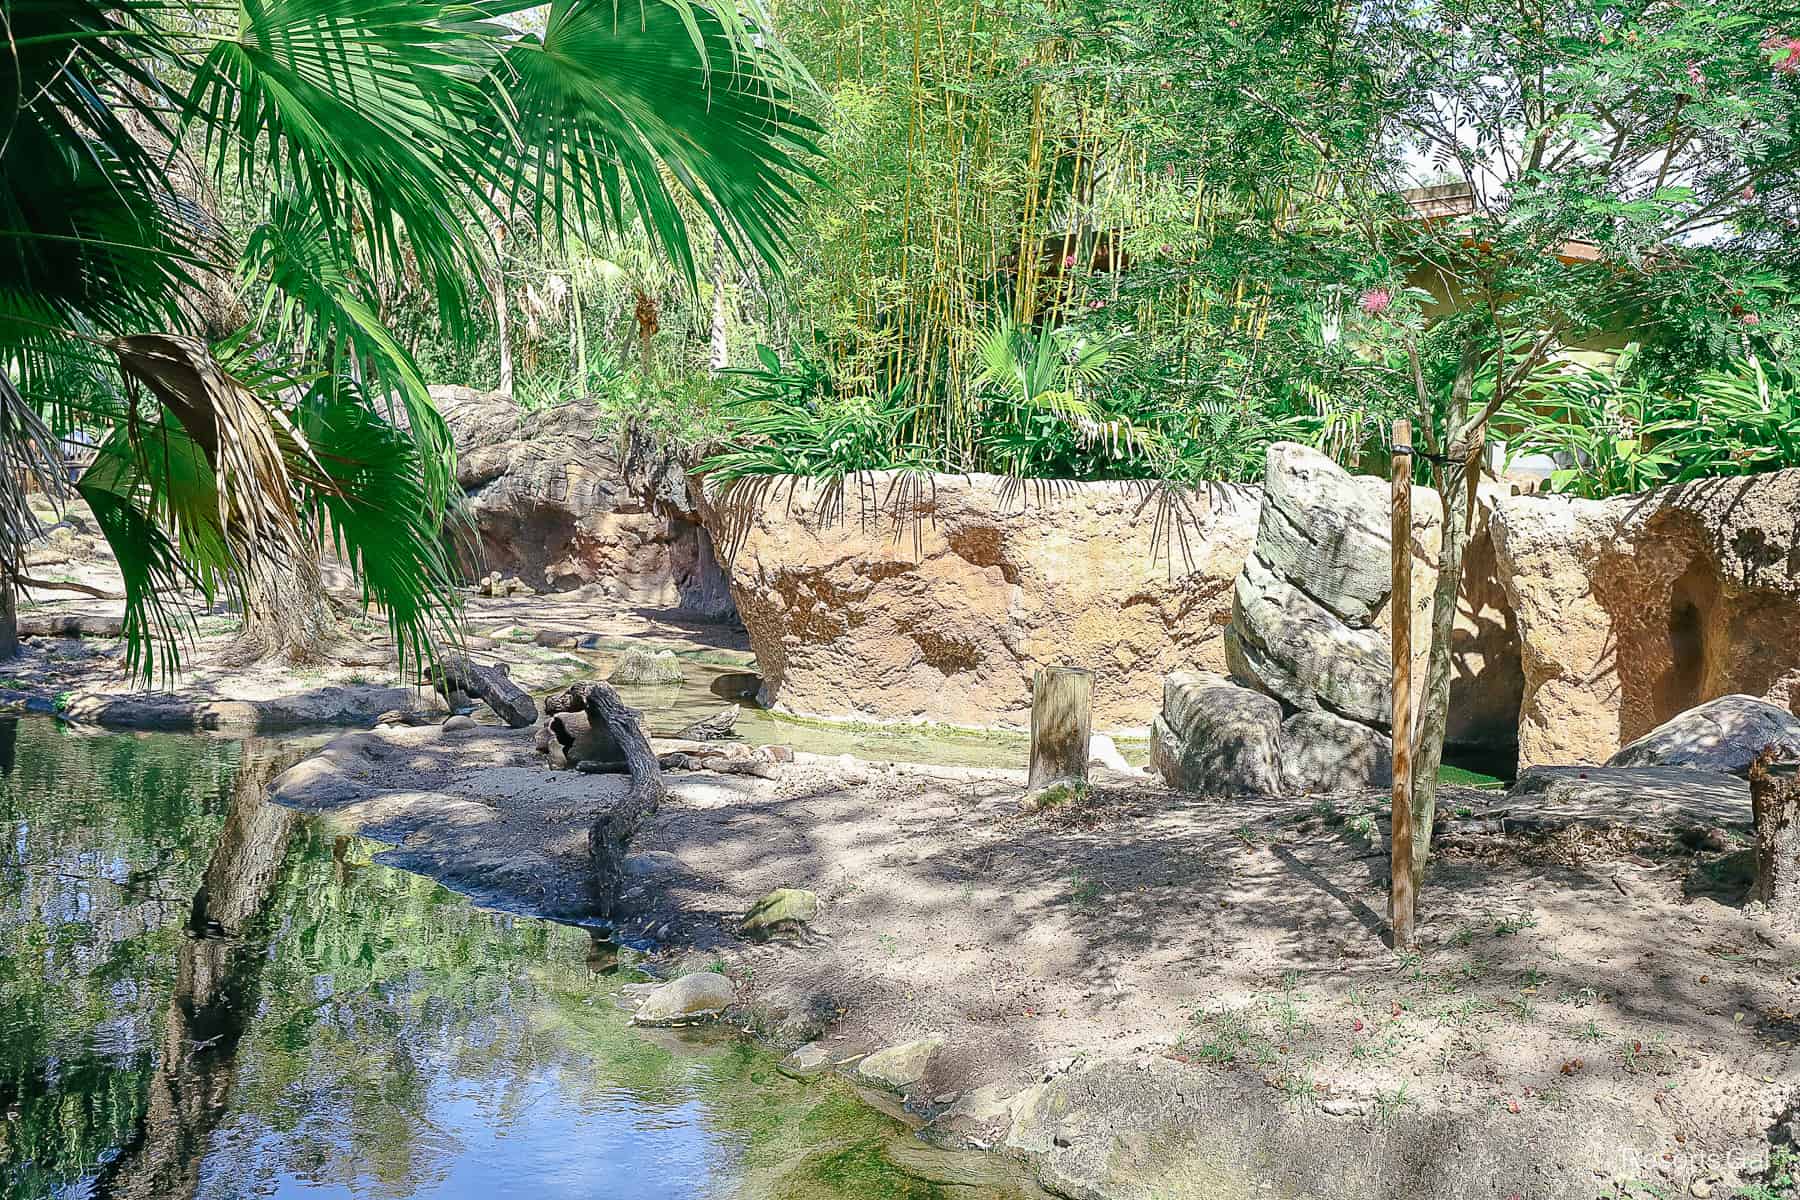 a view of the otters sleeping in a pile near Animal Kingdom's Tree of Life 